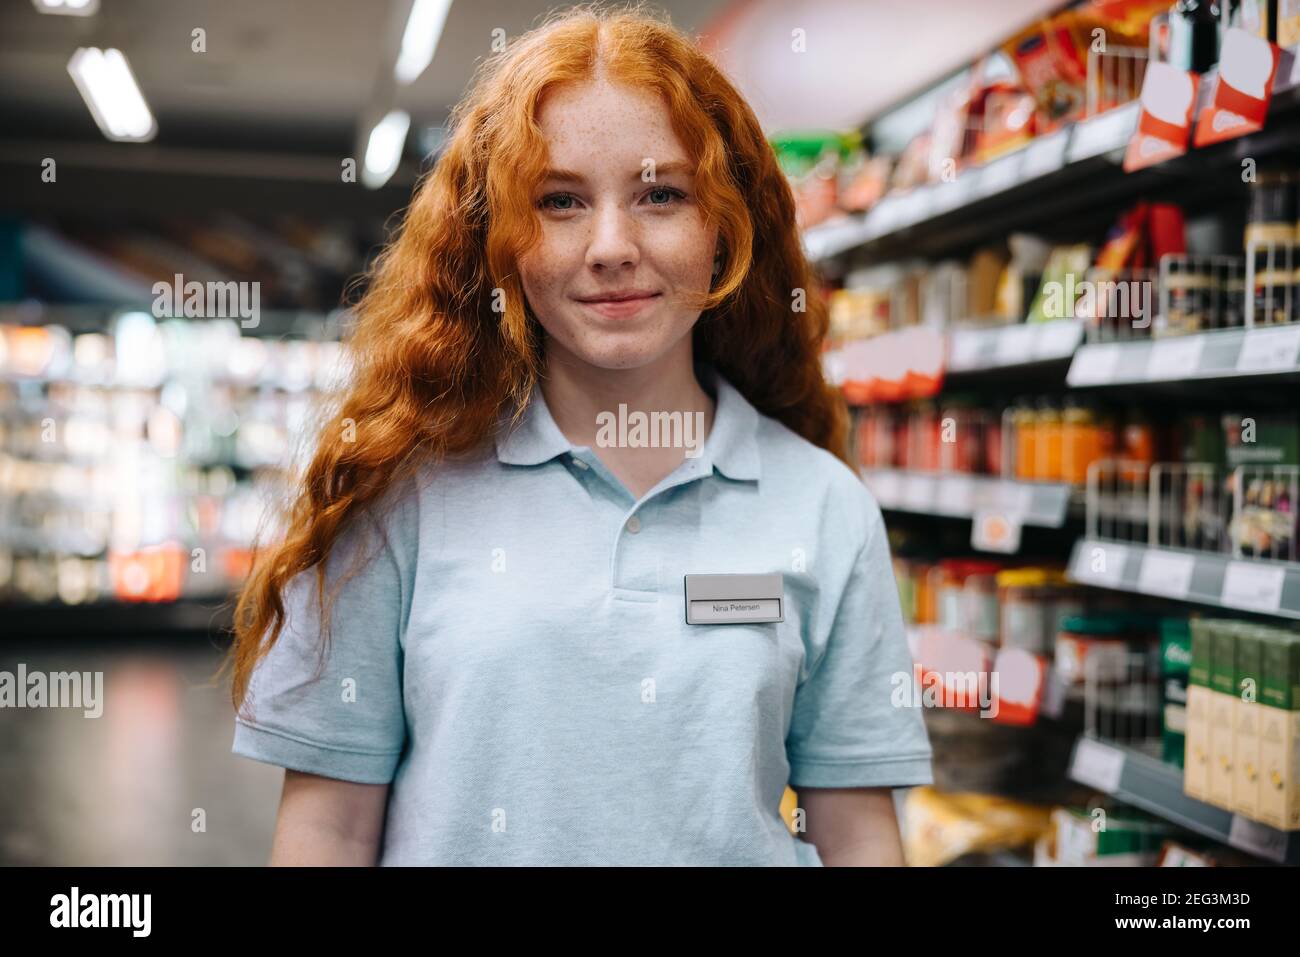 Supermarket trainee employee. Young woman worker on holiday job at grocery shop. Stock Photo